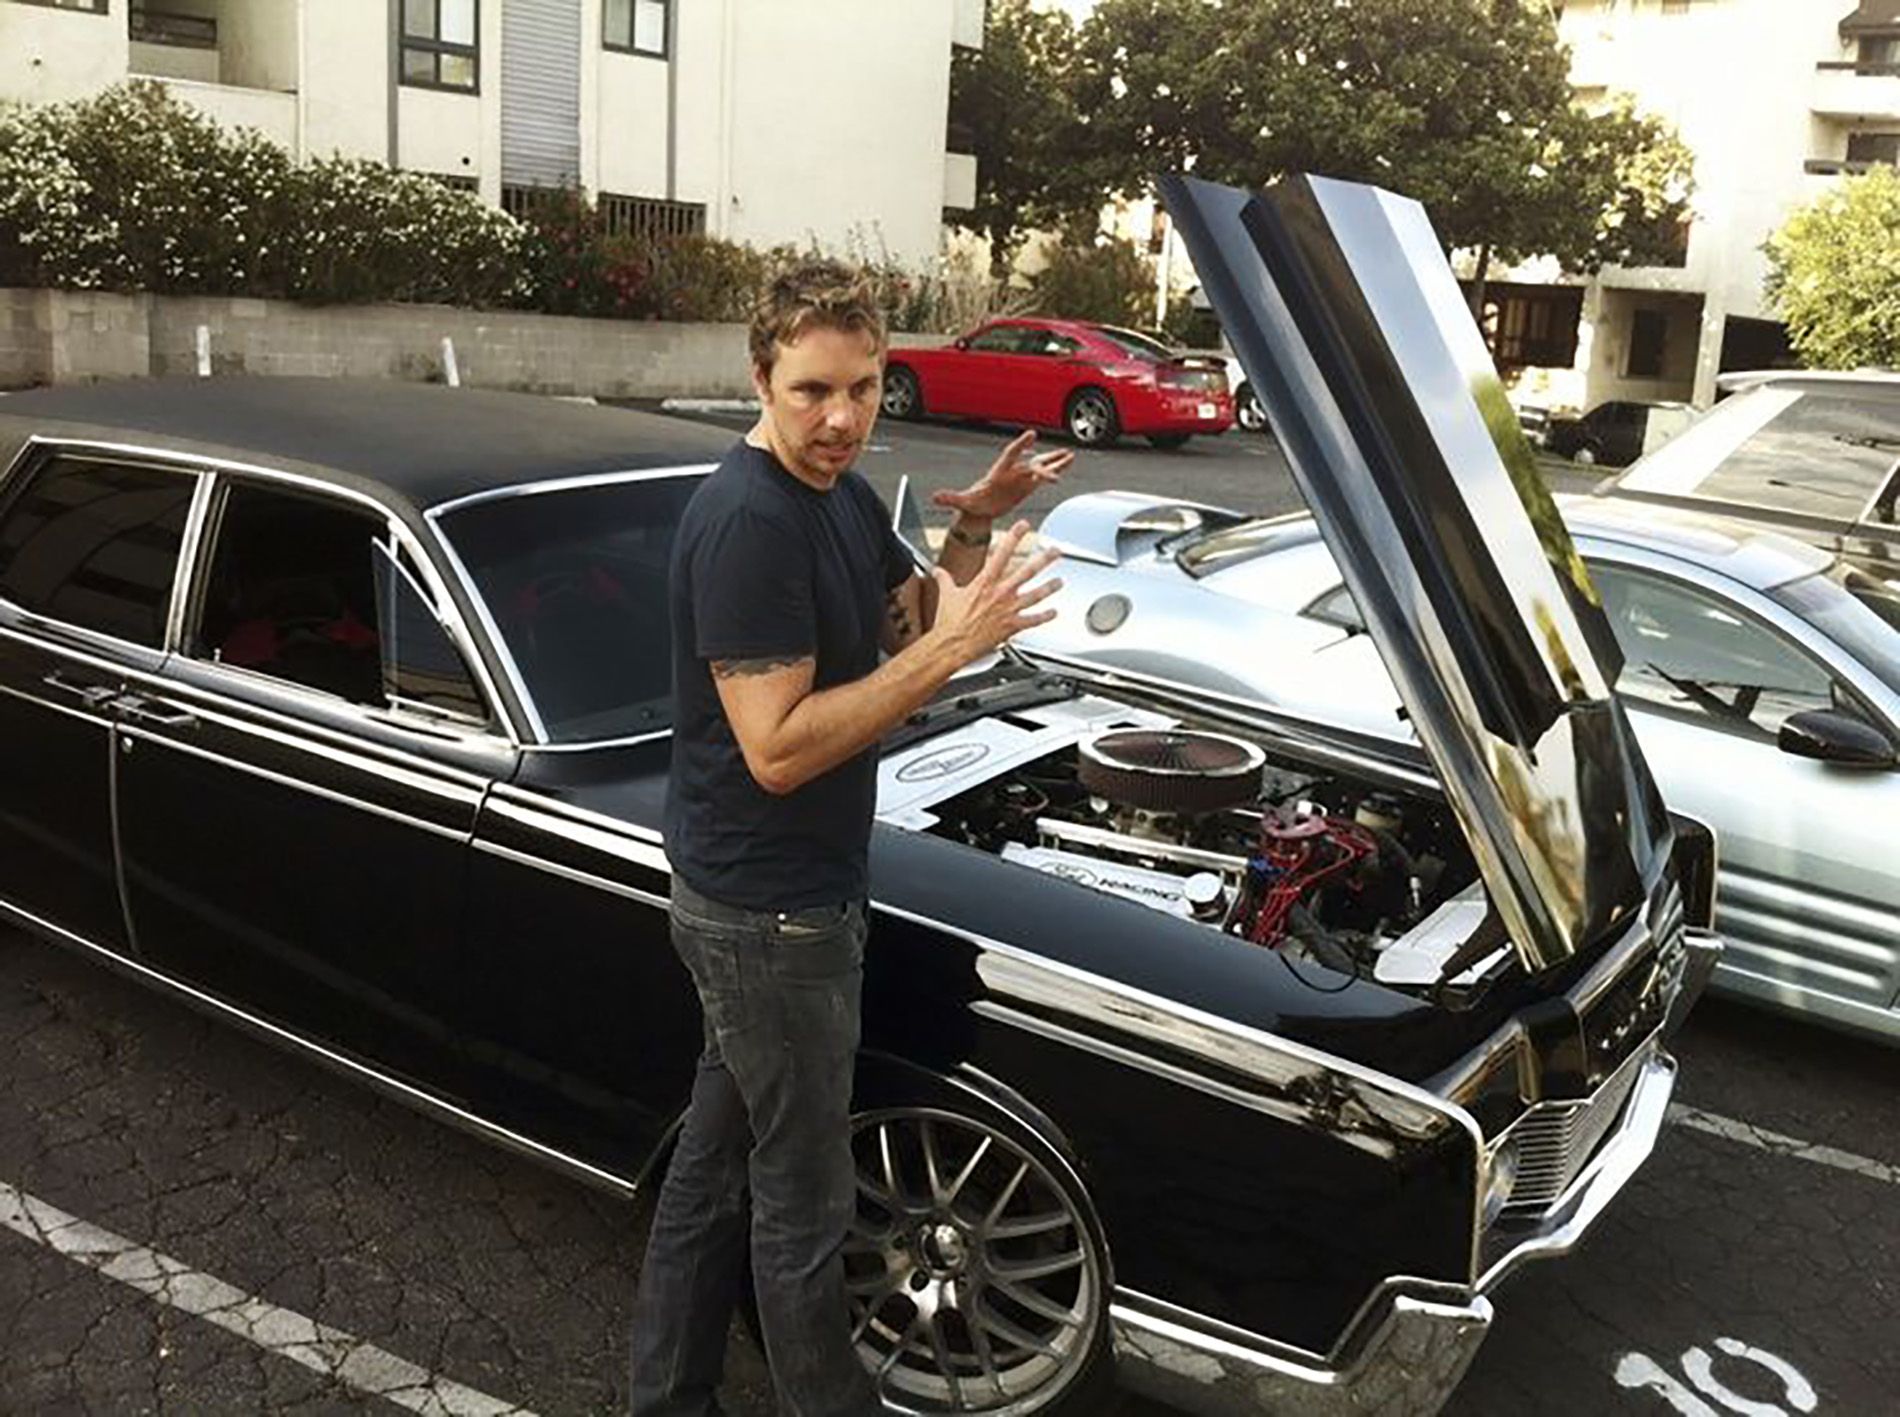 A Detailed Look At Dax Shepard's 1967 Lincoln Continental